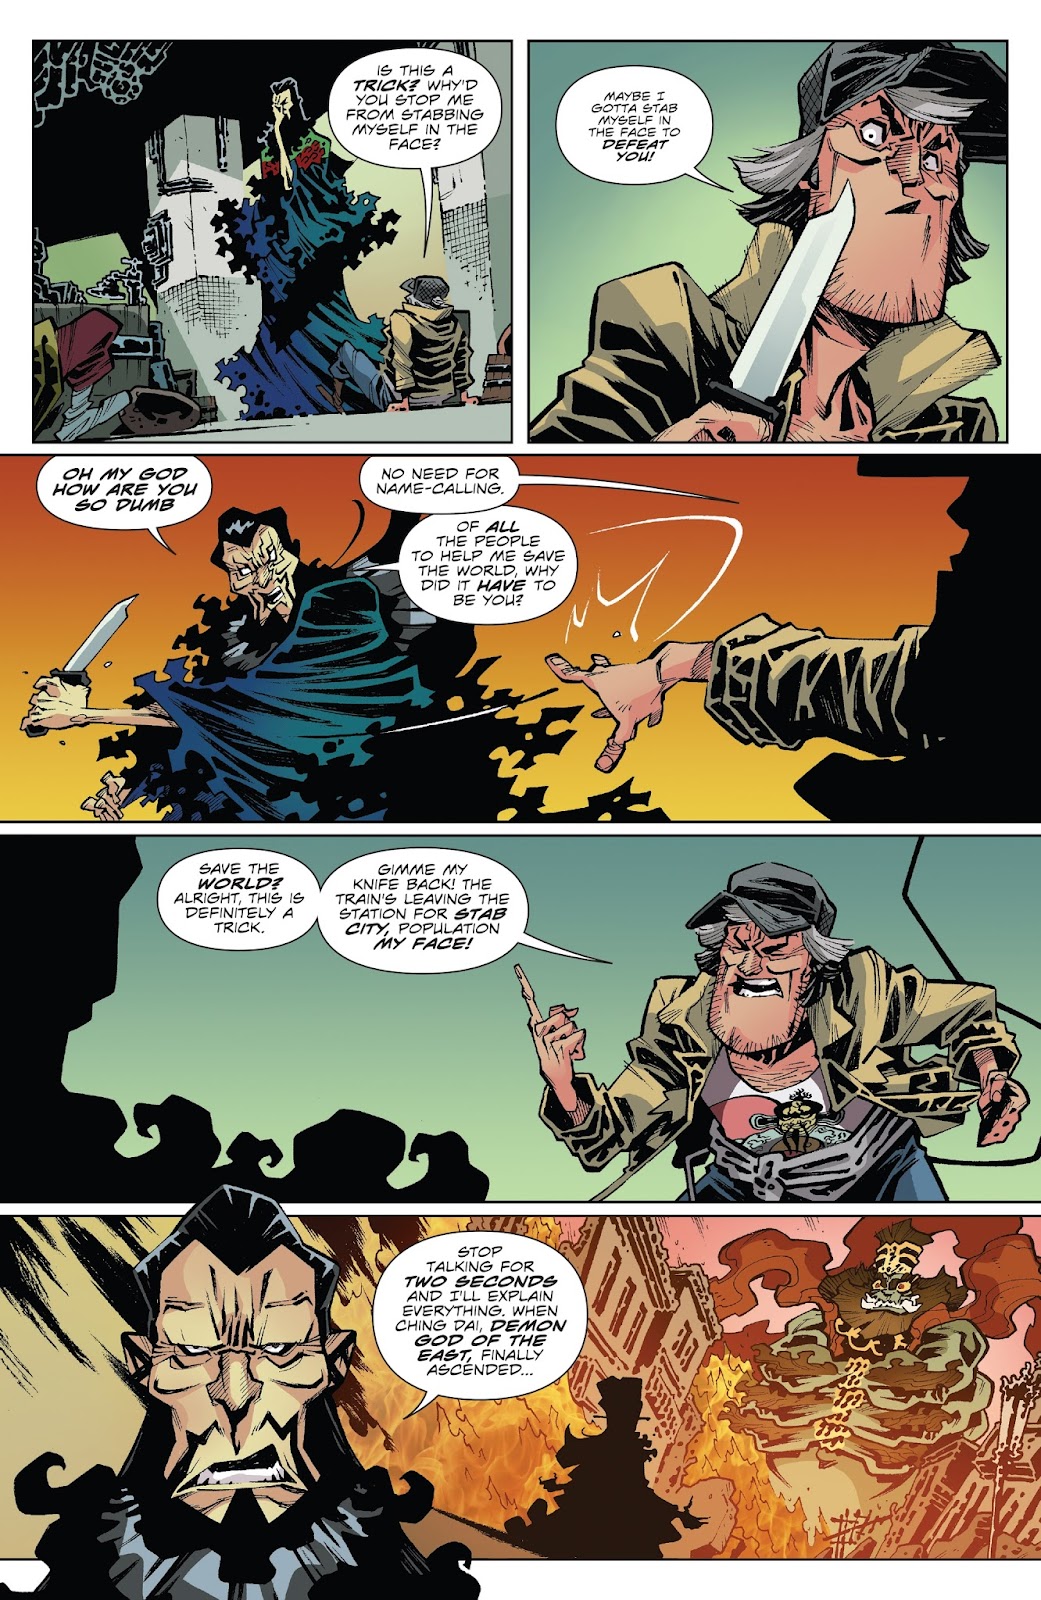 Big Trouble in Little China: Old Man Jack issue 2 - Page 5